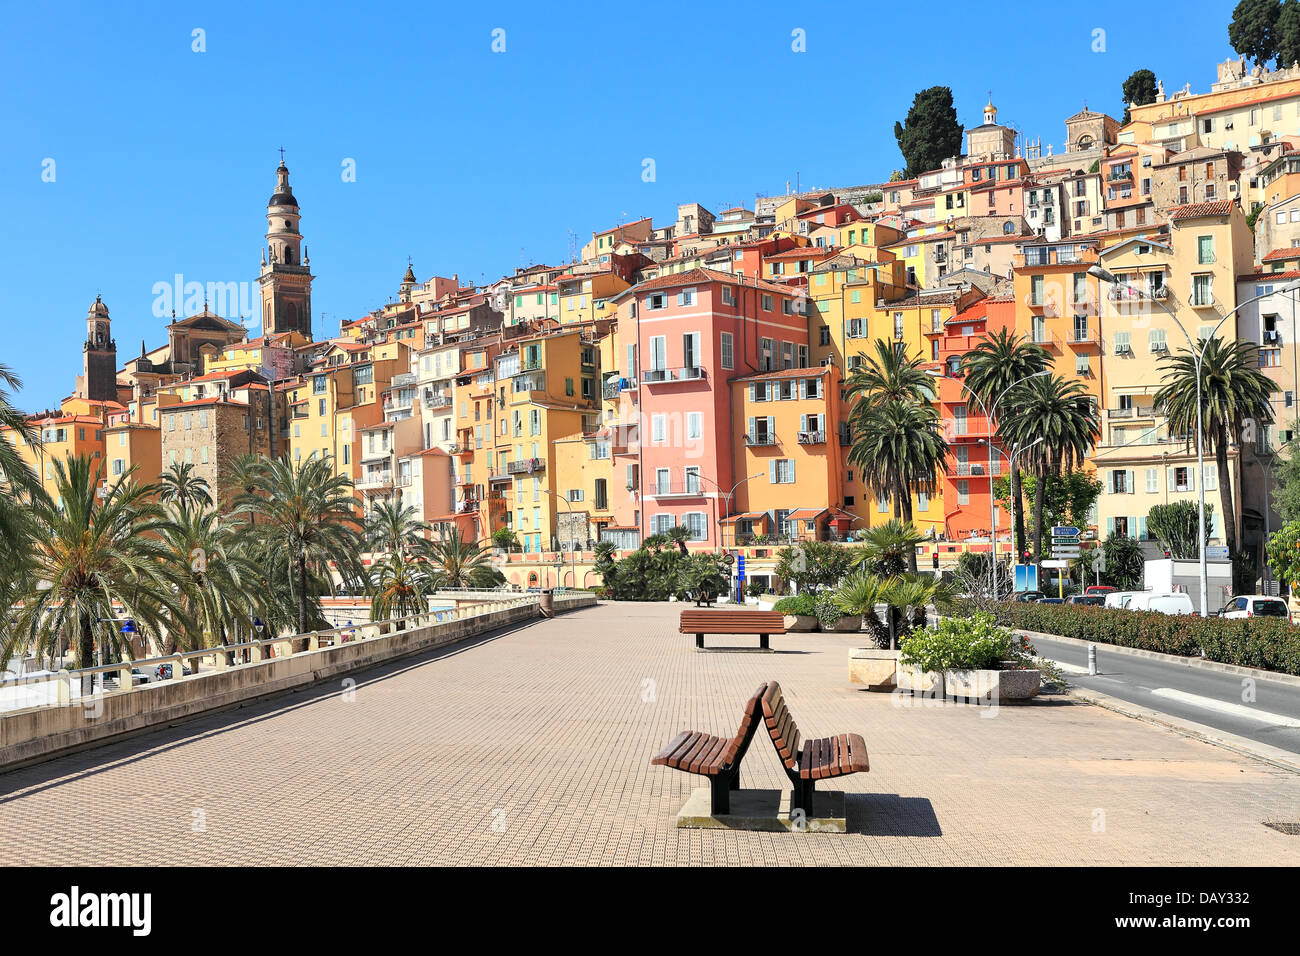 View of promenade and old medieval town with multicolored houses of Menton on French Riviera in France. Stock Photo